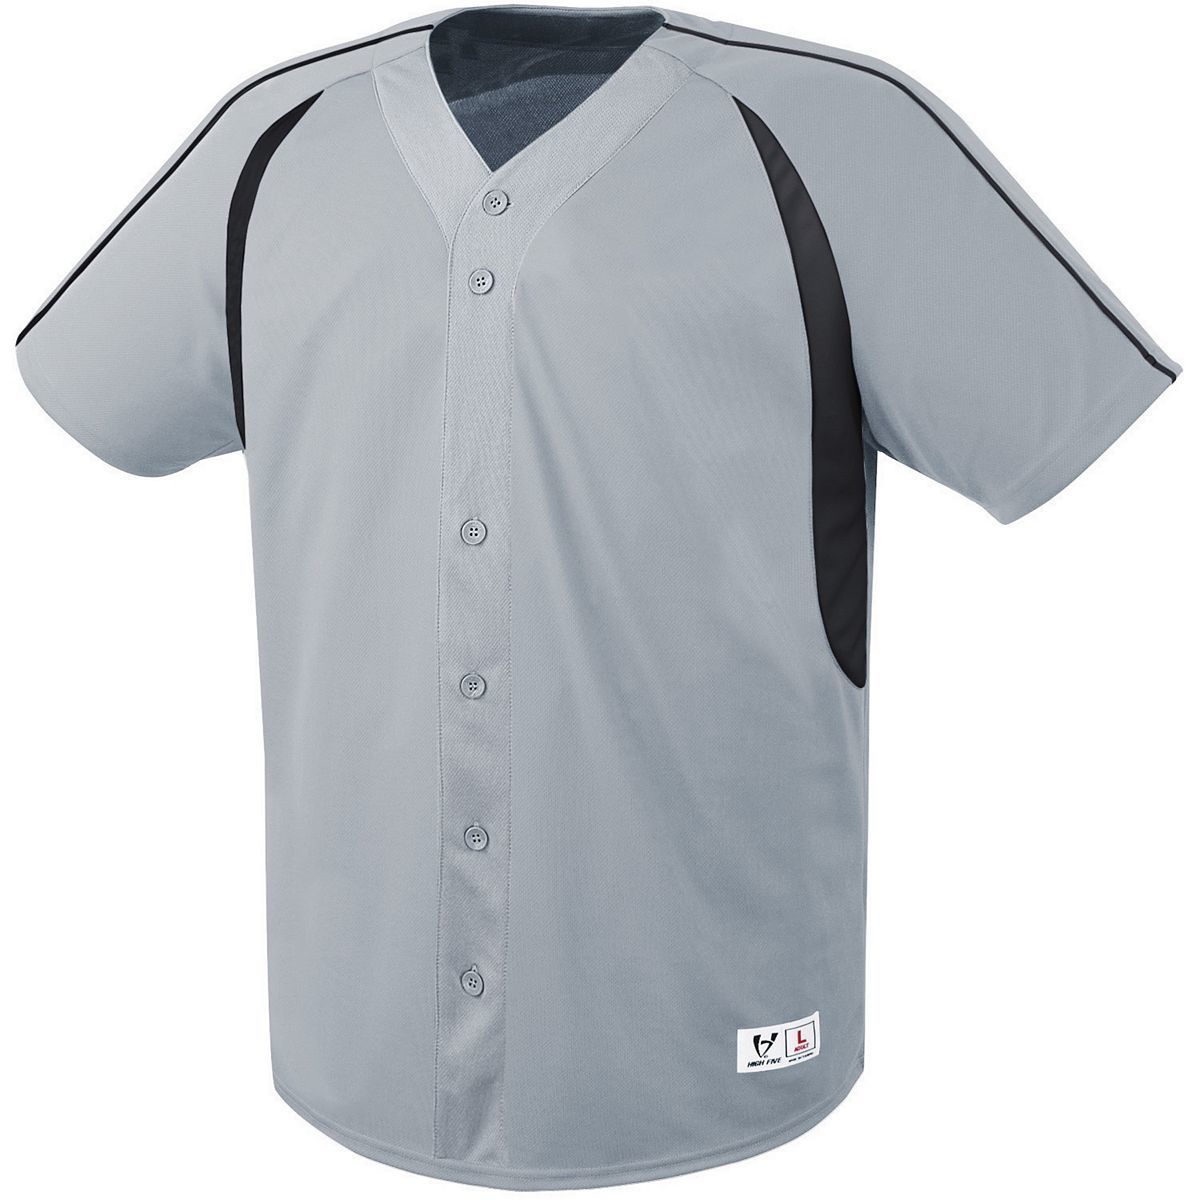 Hawkins High Full-Button Baseball Jersey *IN-STOCK* Adult Small